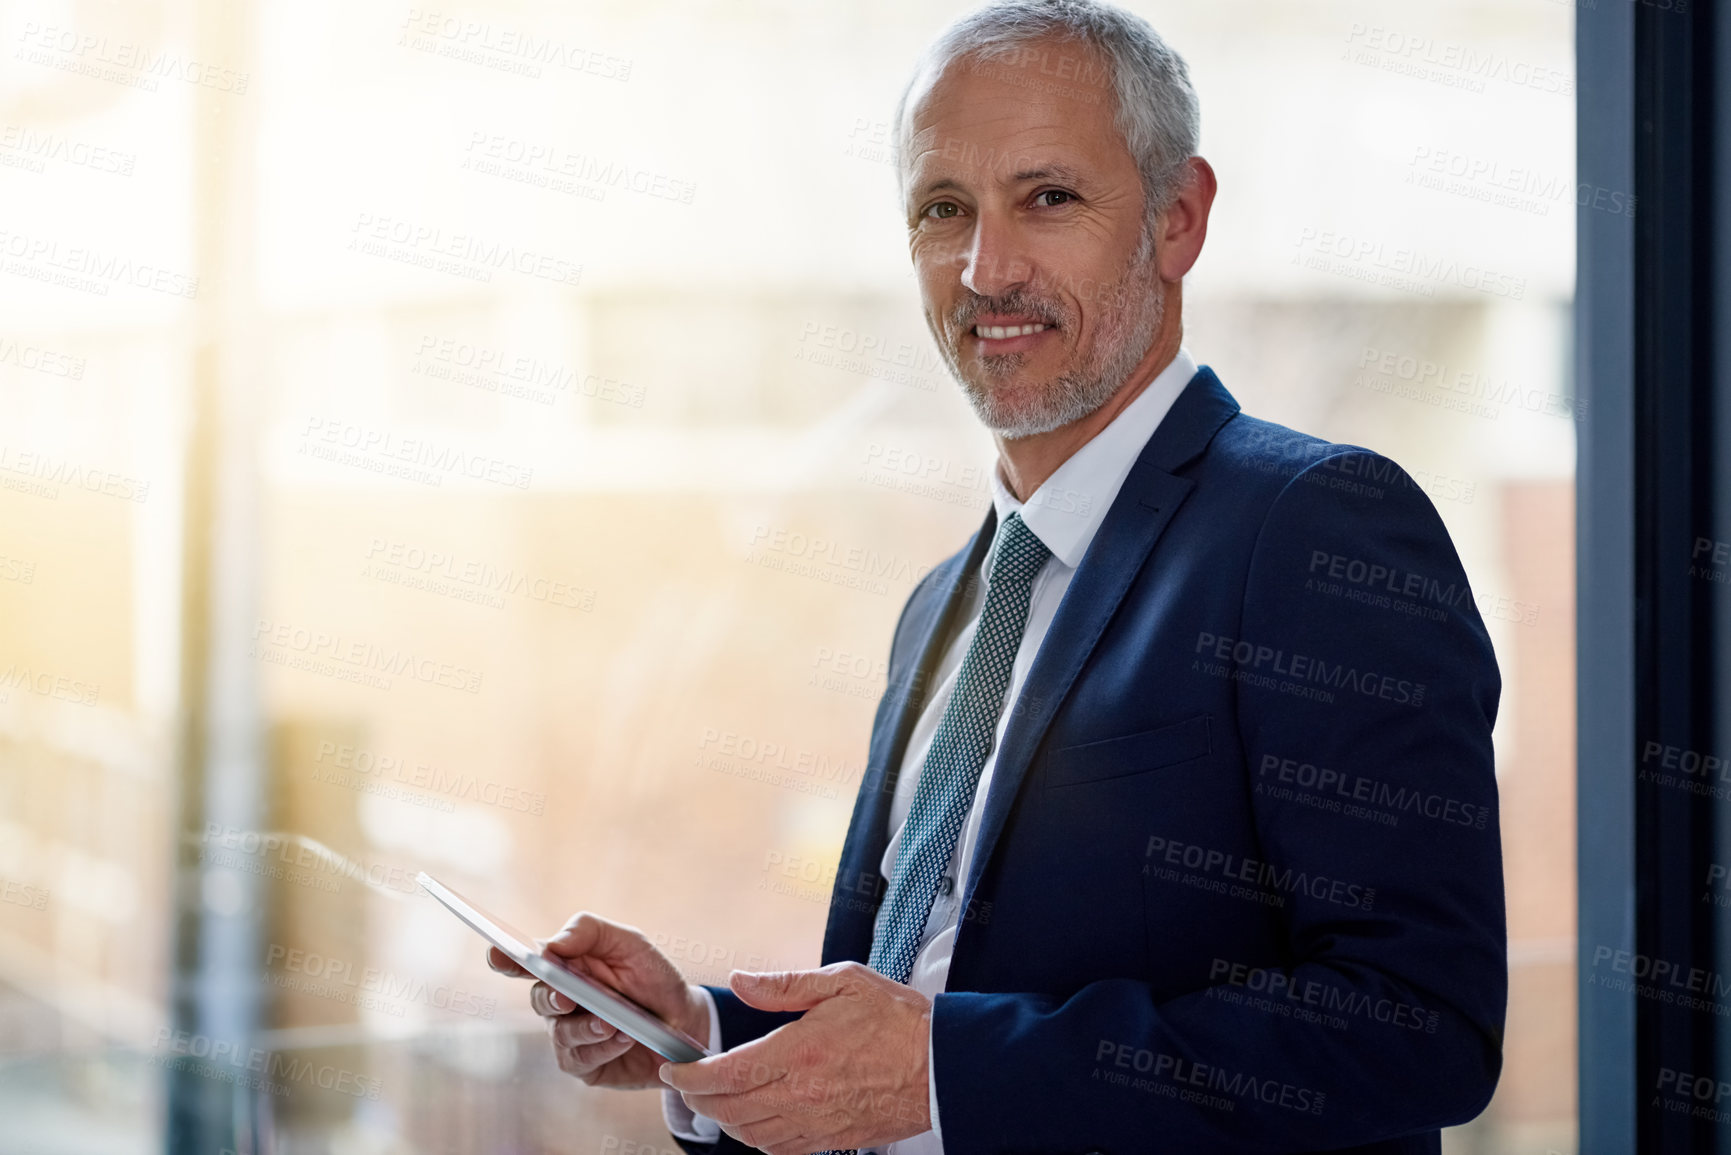 Buy stock photo Portrait of a smiling mature businessman using a digital tablet while standing in an office